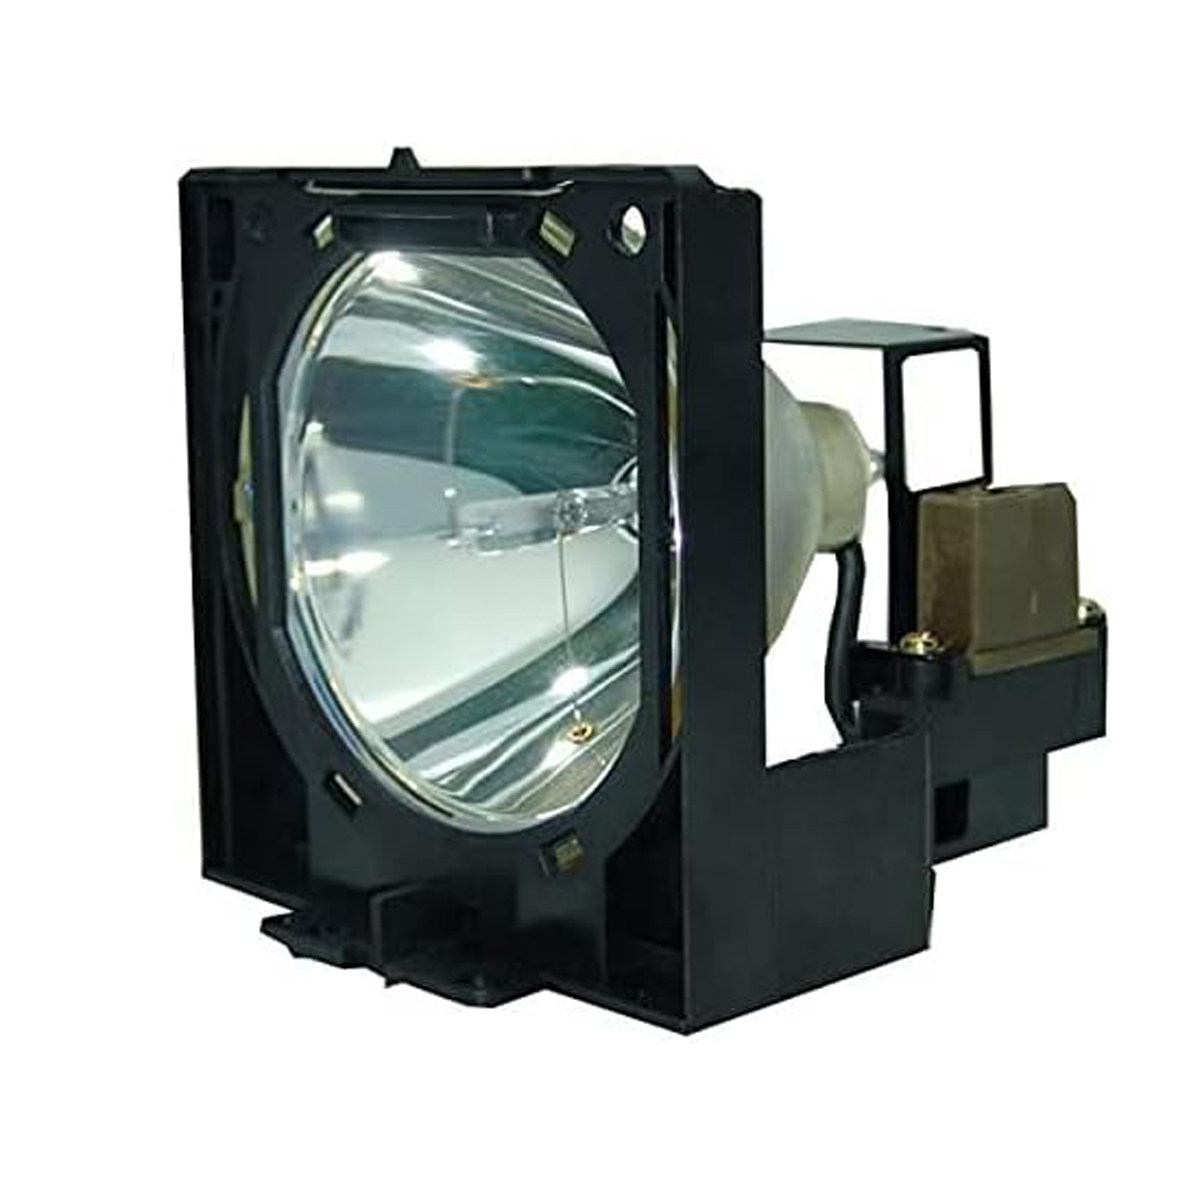 Replacement Projector lamp LAMP-016 For PROXIMA DP9240 DP9260